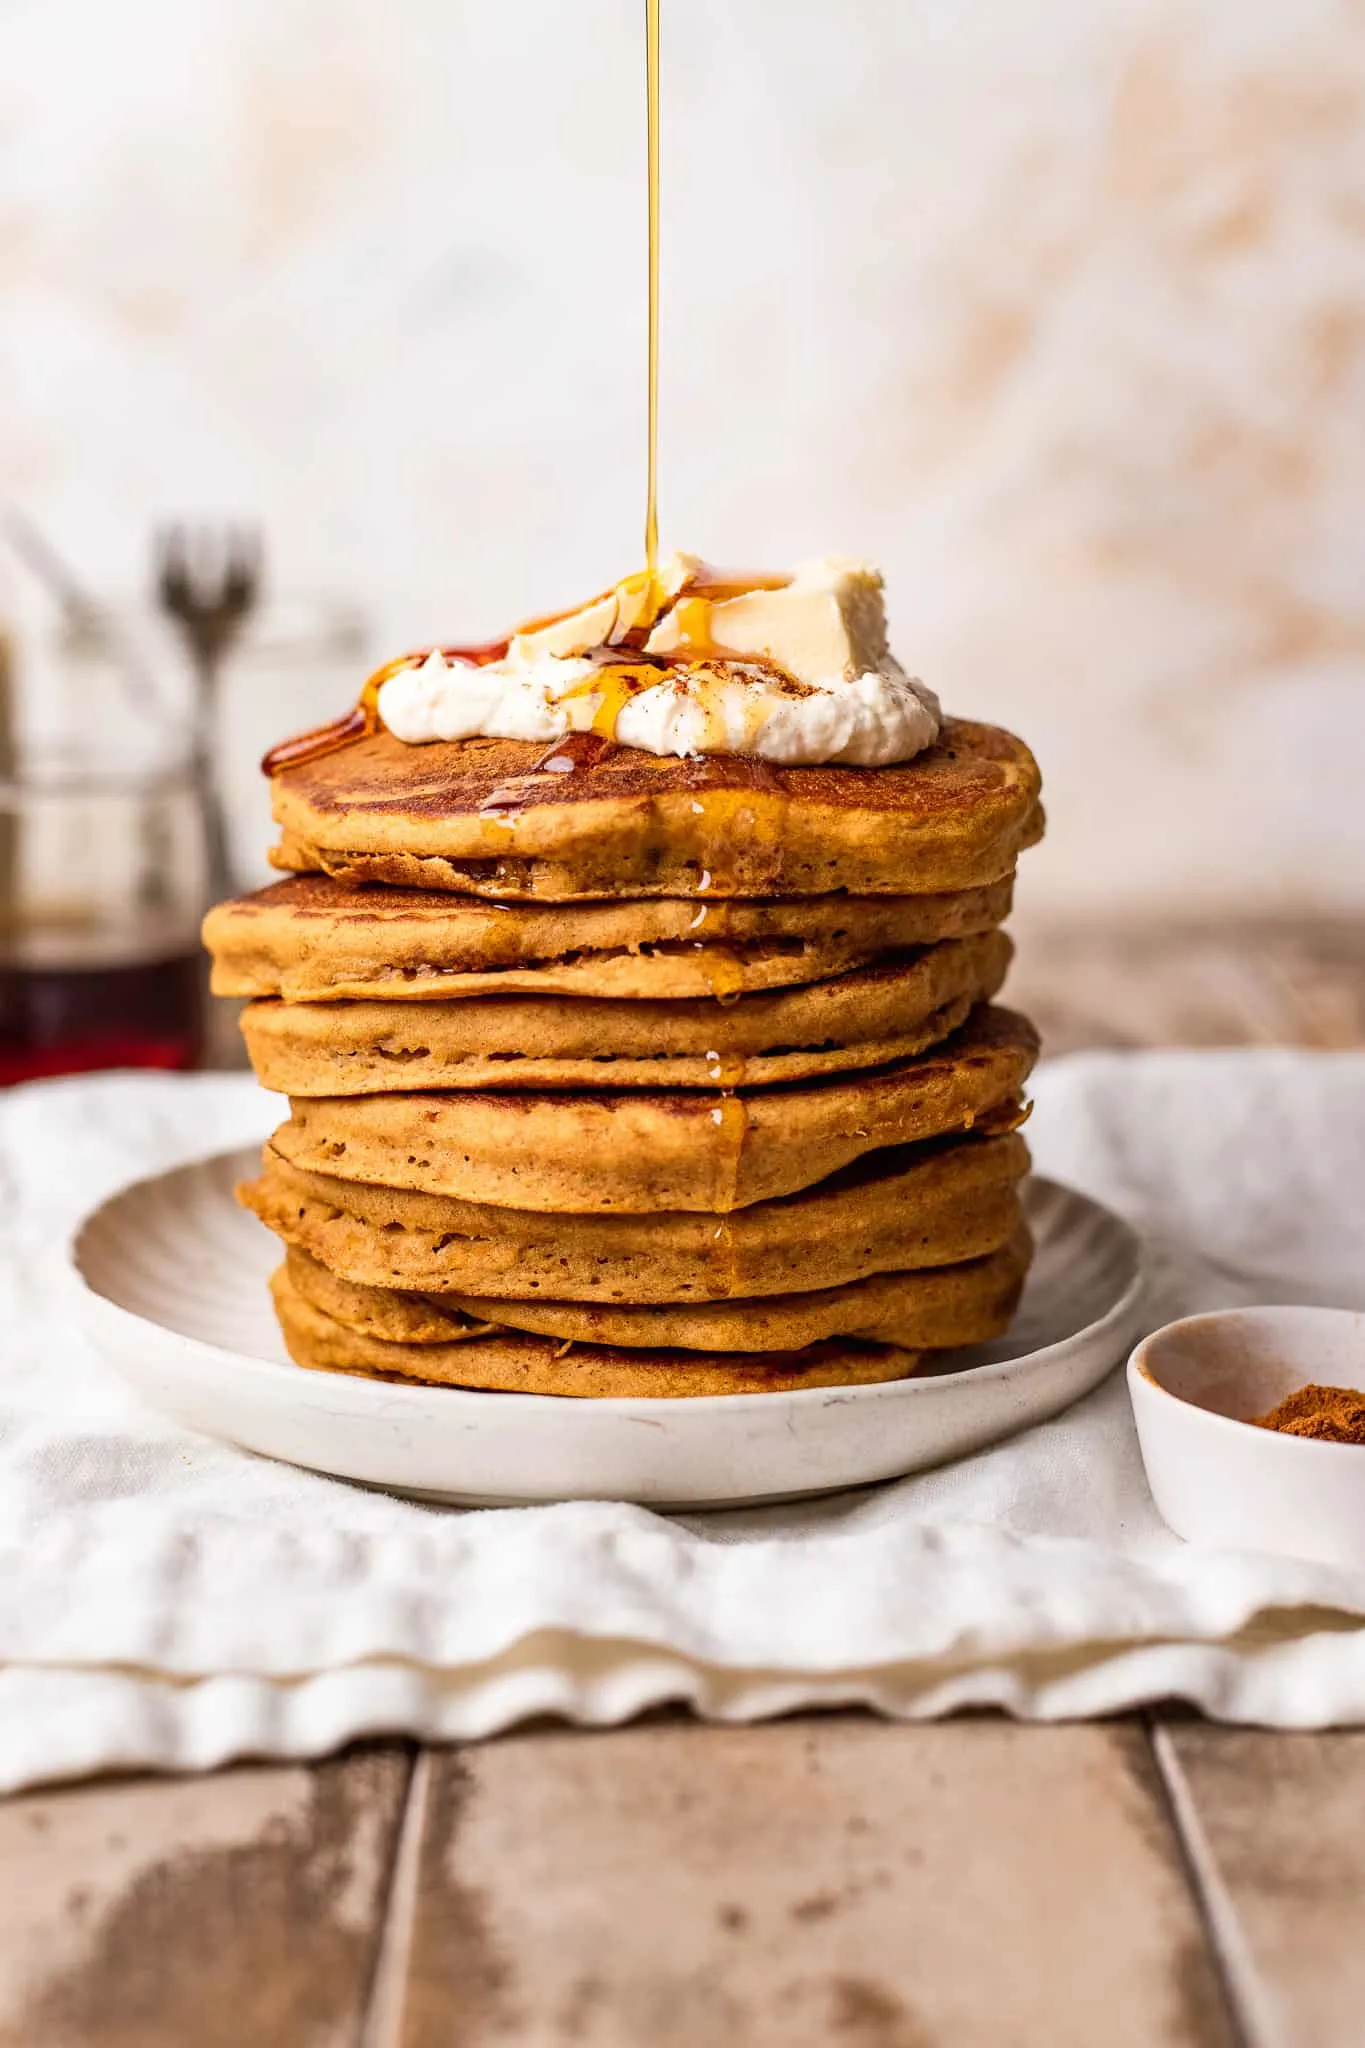 A syrup being drizzled on a stack of vegan pumpkin pancake with whipped cream and butter.